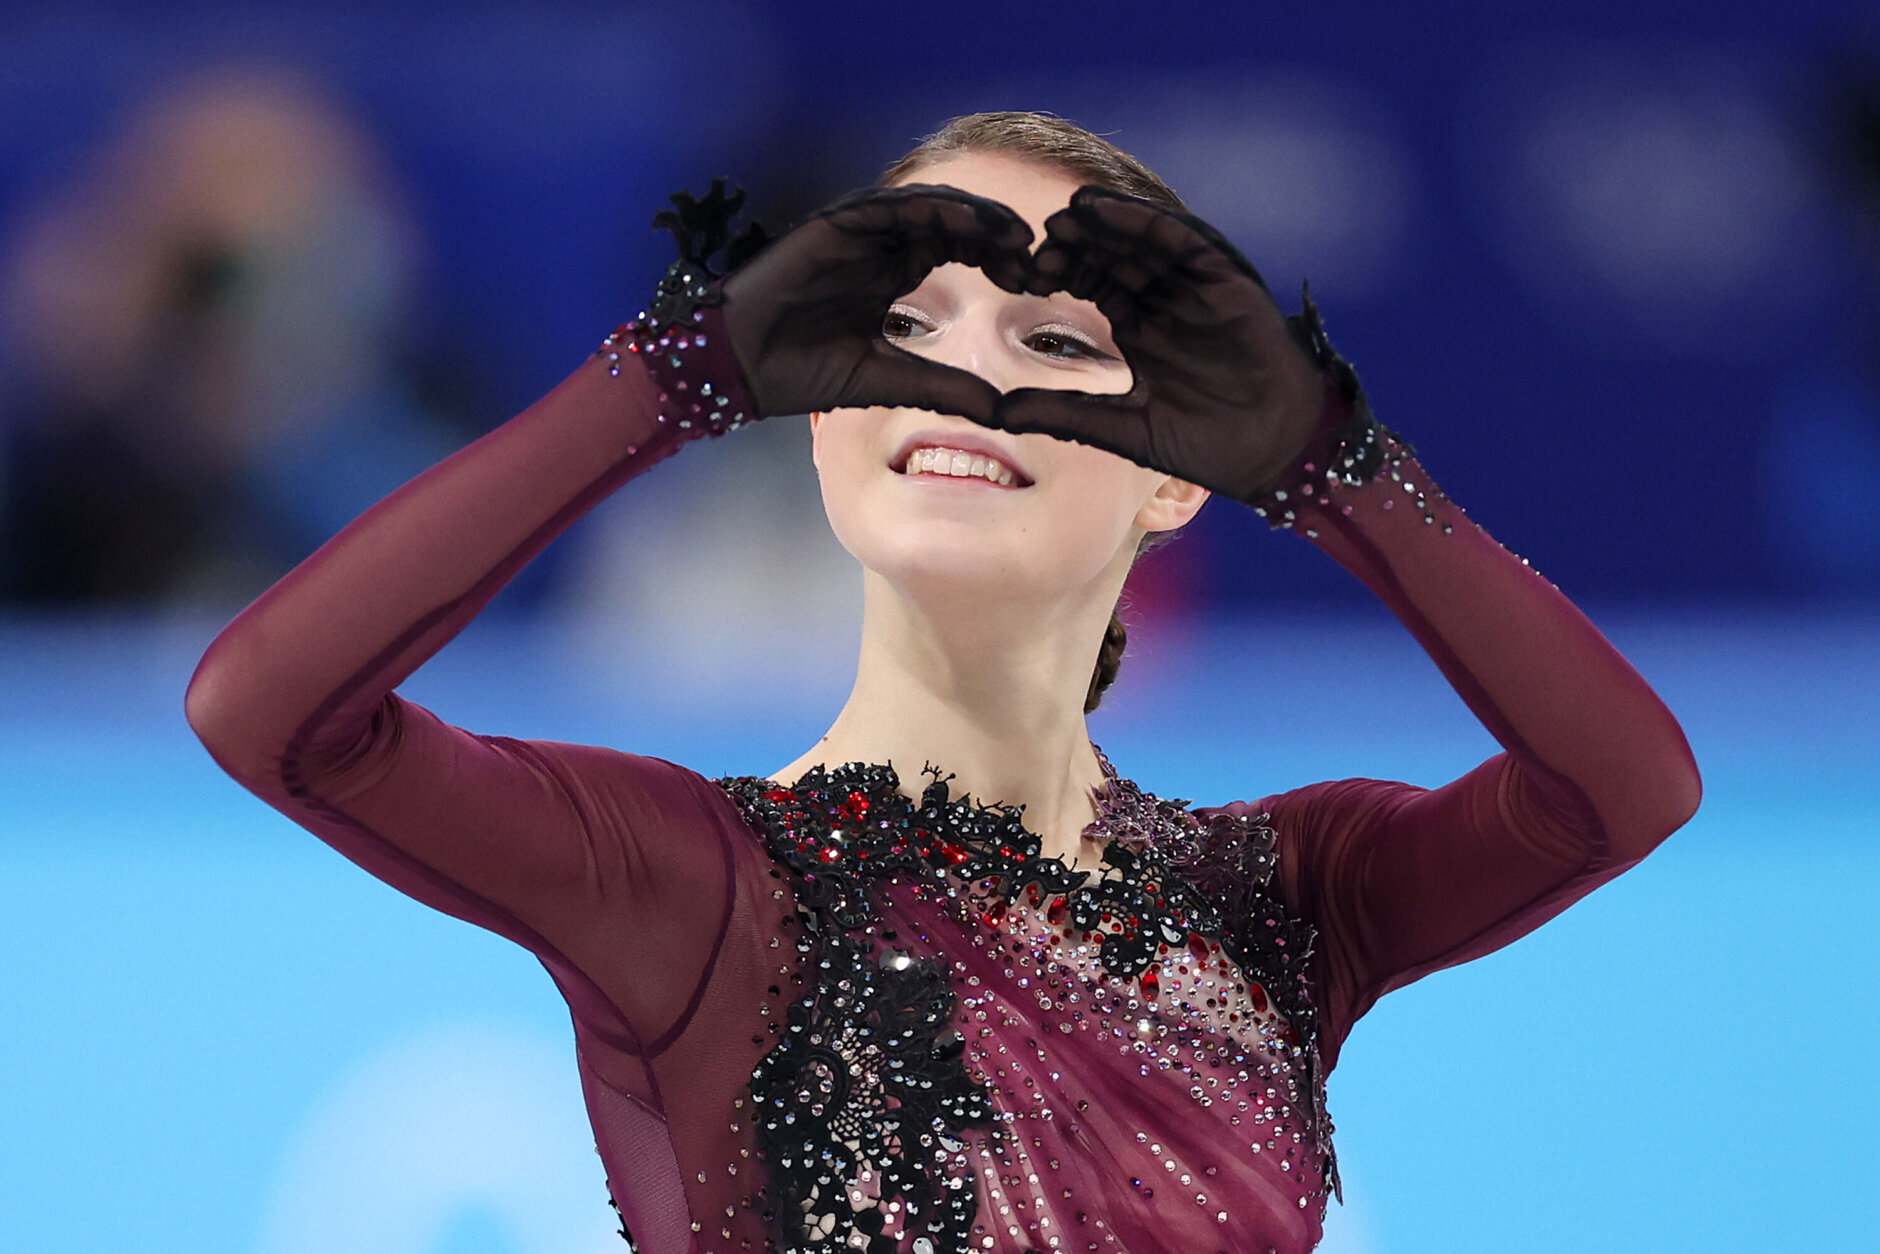 BEIJING, CHINA - FEBRUARY 17: Anna Shcherbakova of Team ROC reacts after skating during the Women Single Skating Free Skating on day thirteen of the Beijing 2022 Winter Olympic Games at Capital Indoor Stadium on February 17, 2022 in Beijing, China. (Photo by Matthew Stockman/Getty Images)